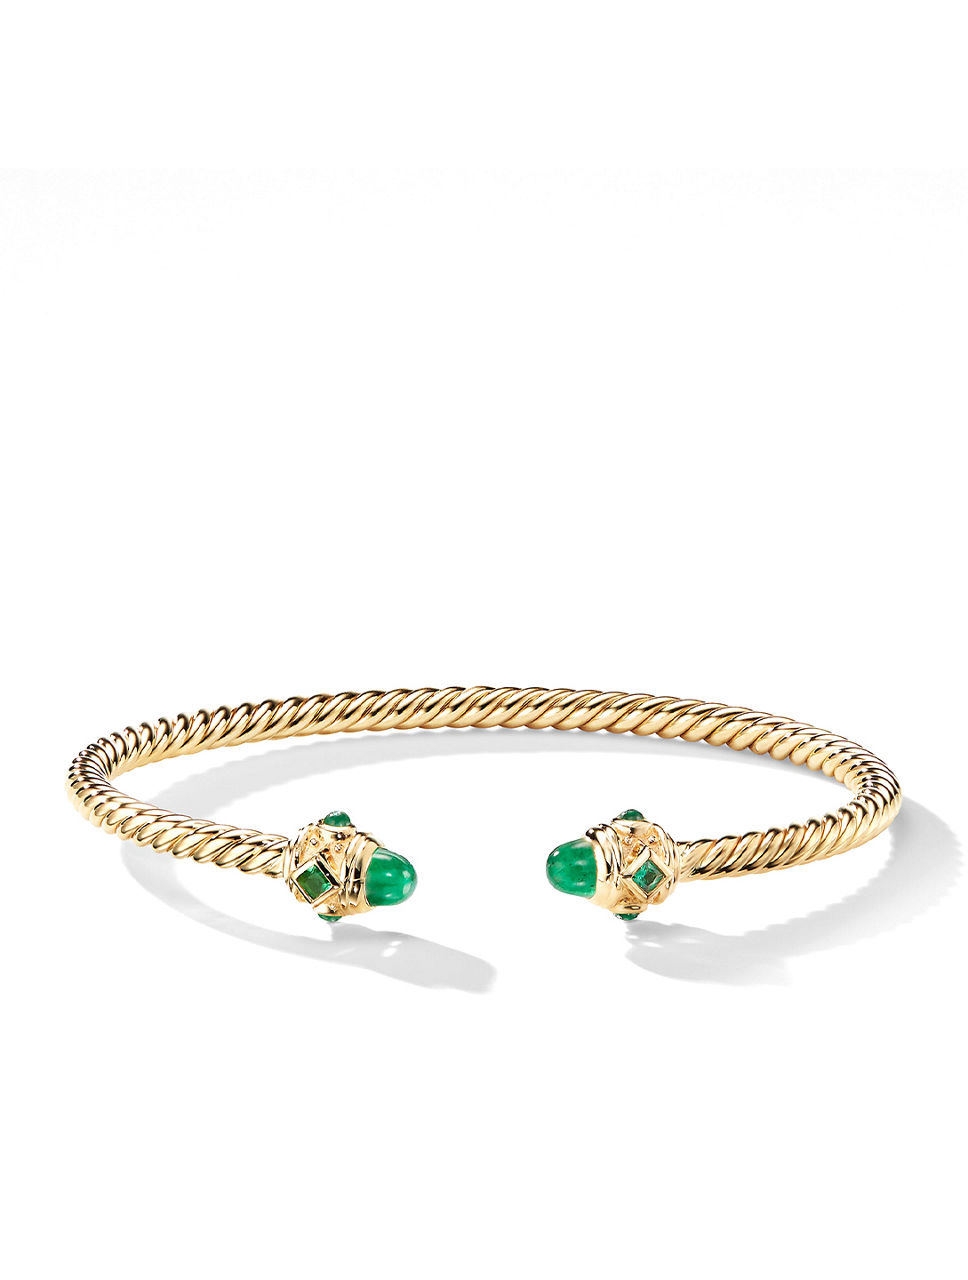 Renaissance® Bracelet In 18k Yellow Gold With Emeralds